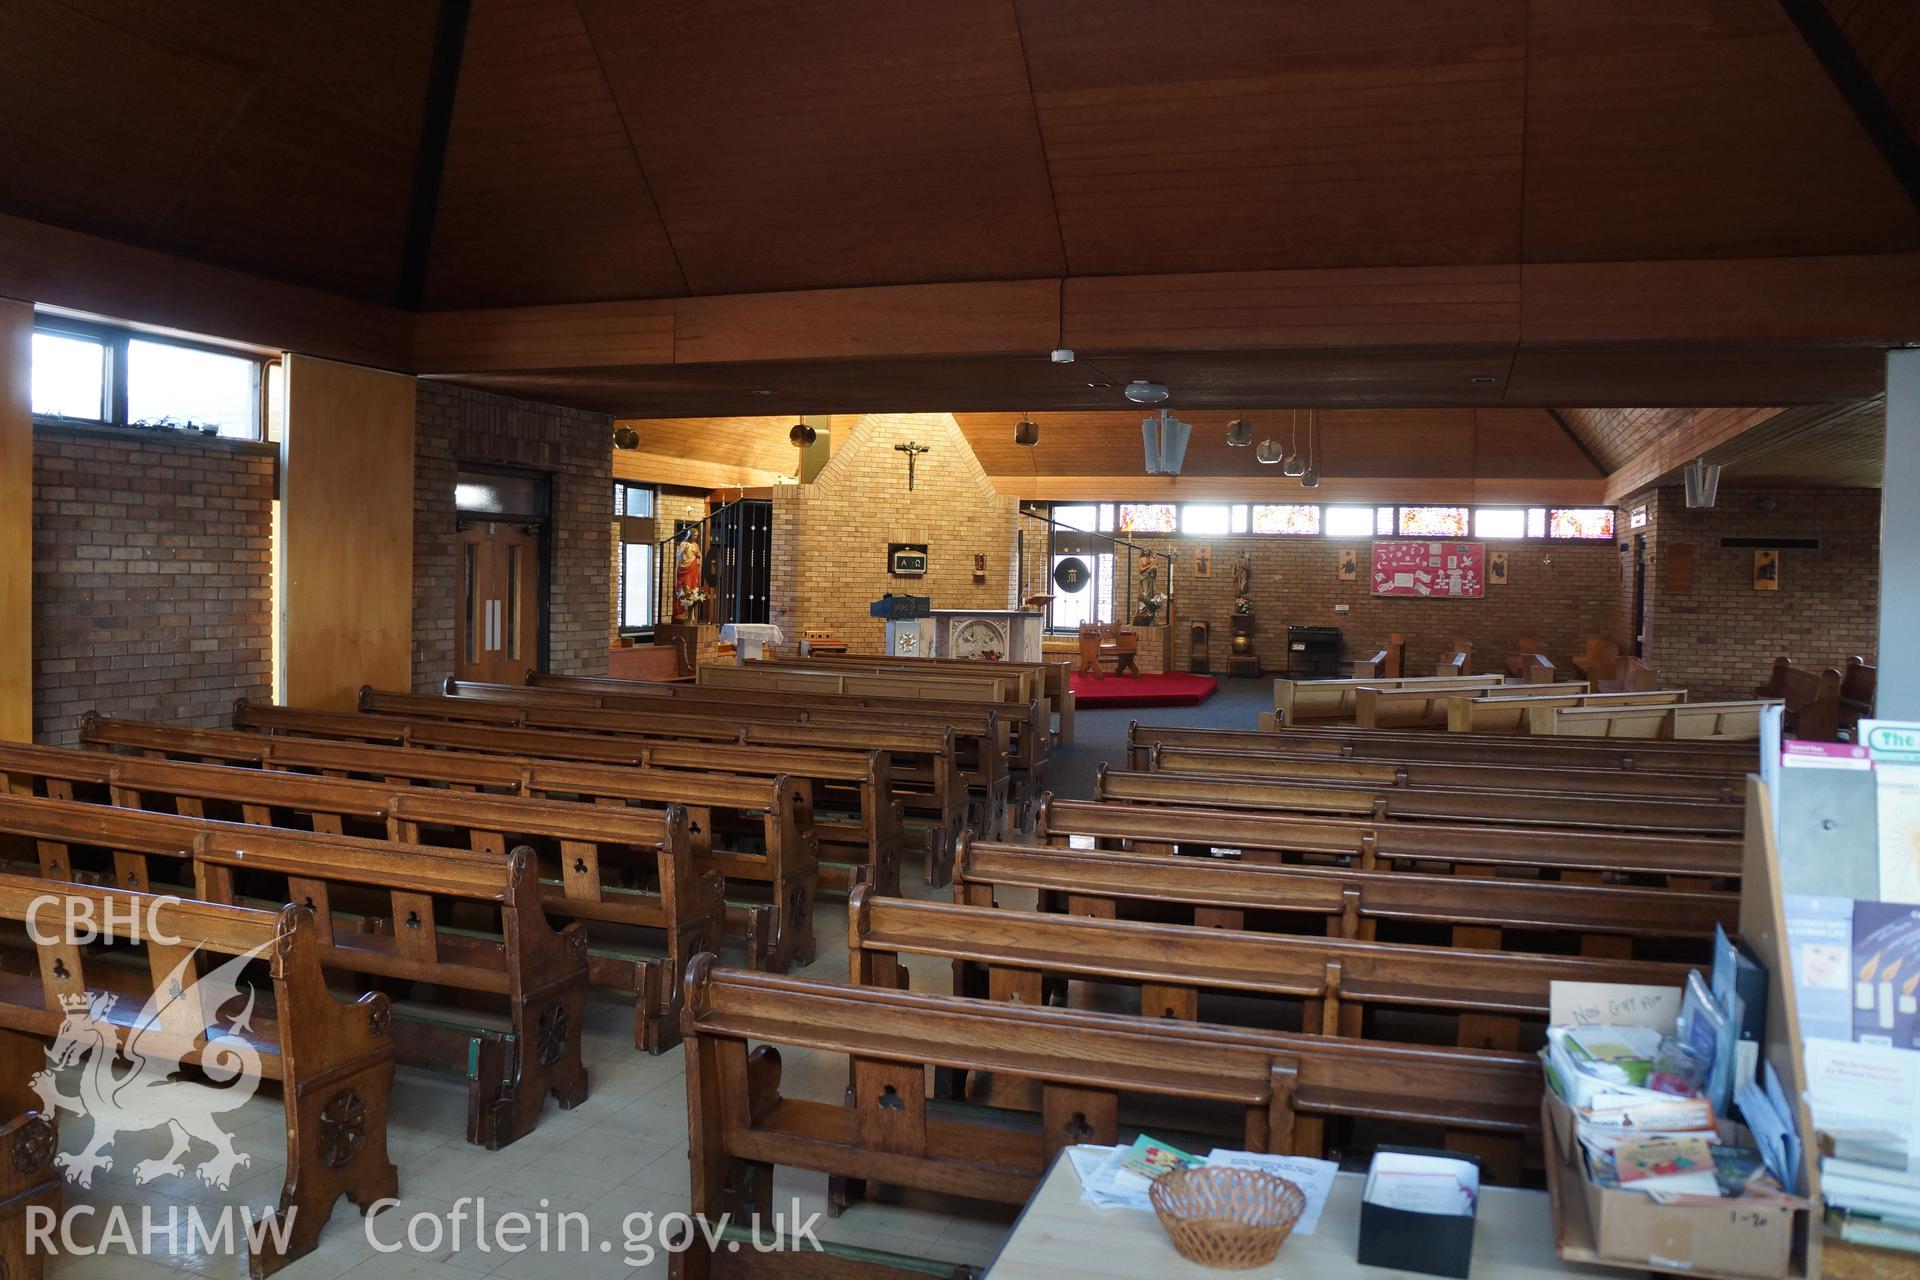 Digital colour photograph showing interior of Our Lady of the Assumption Catholic church, Rhyl.